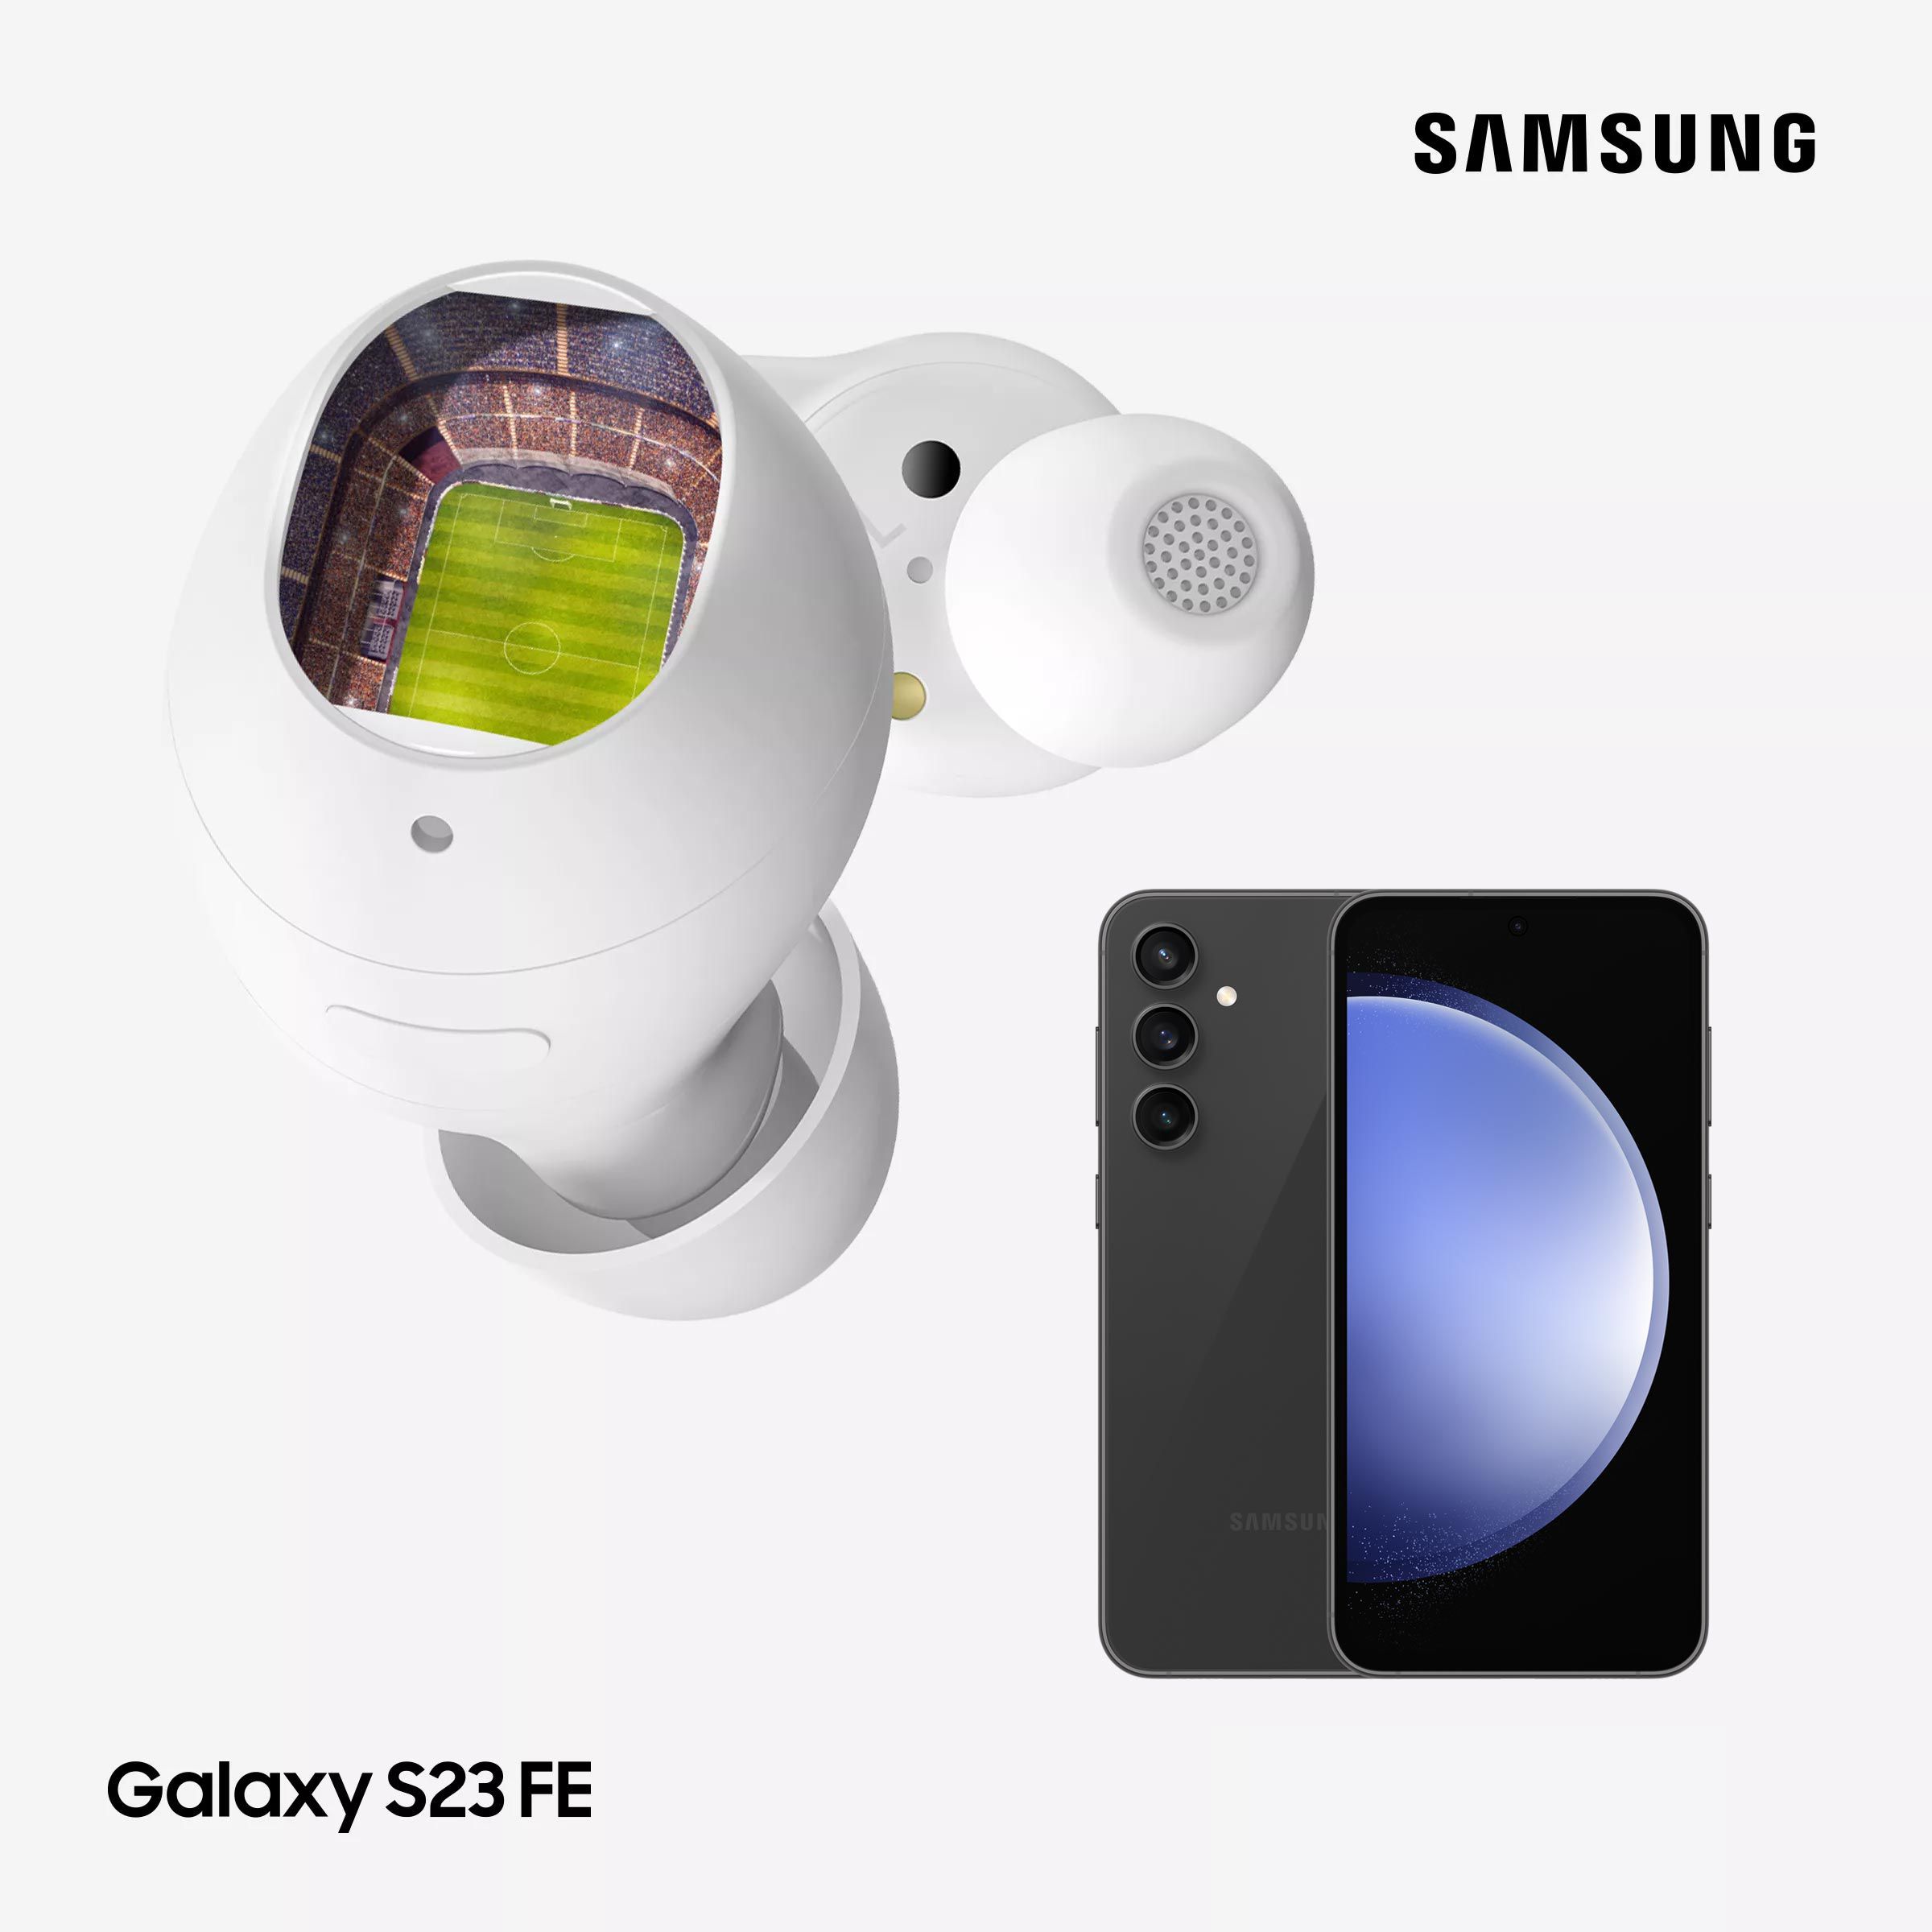 samsung offer - Buy a Galaxy S23 FE and claim a set of Buds FE worth £99